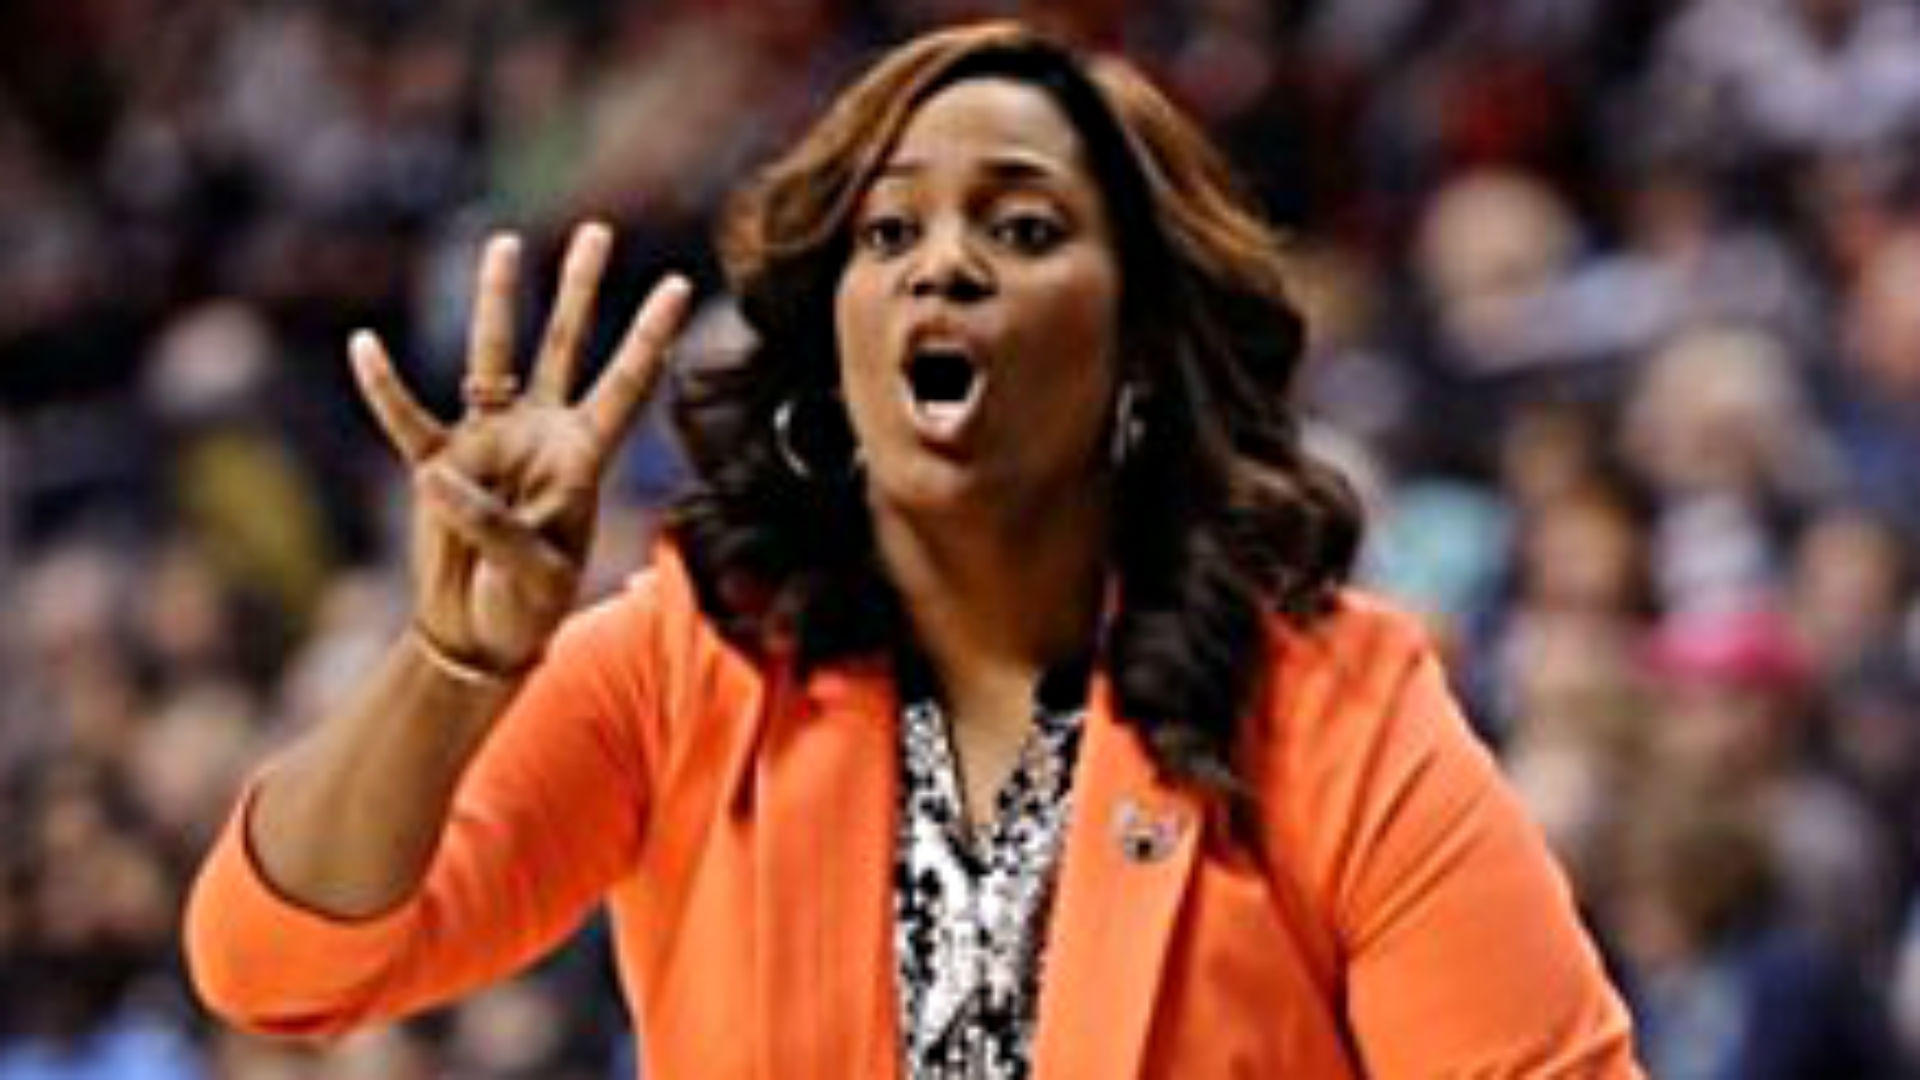 Women's basketball coach fired after suspending two players for dating